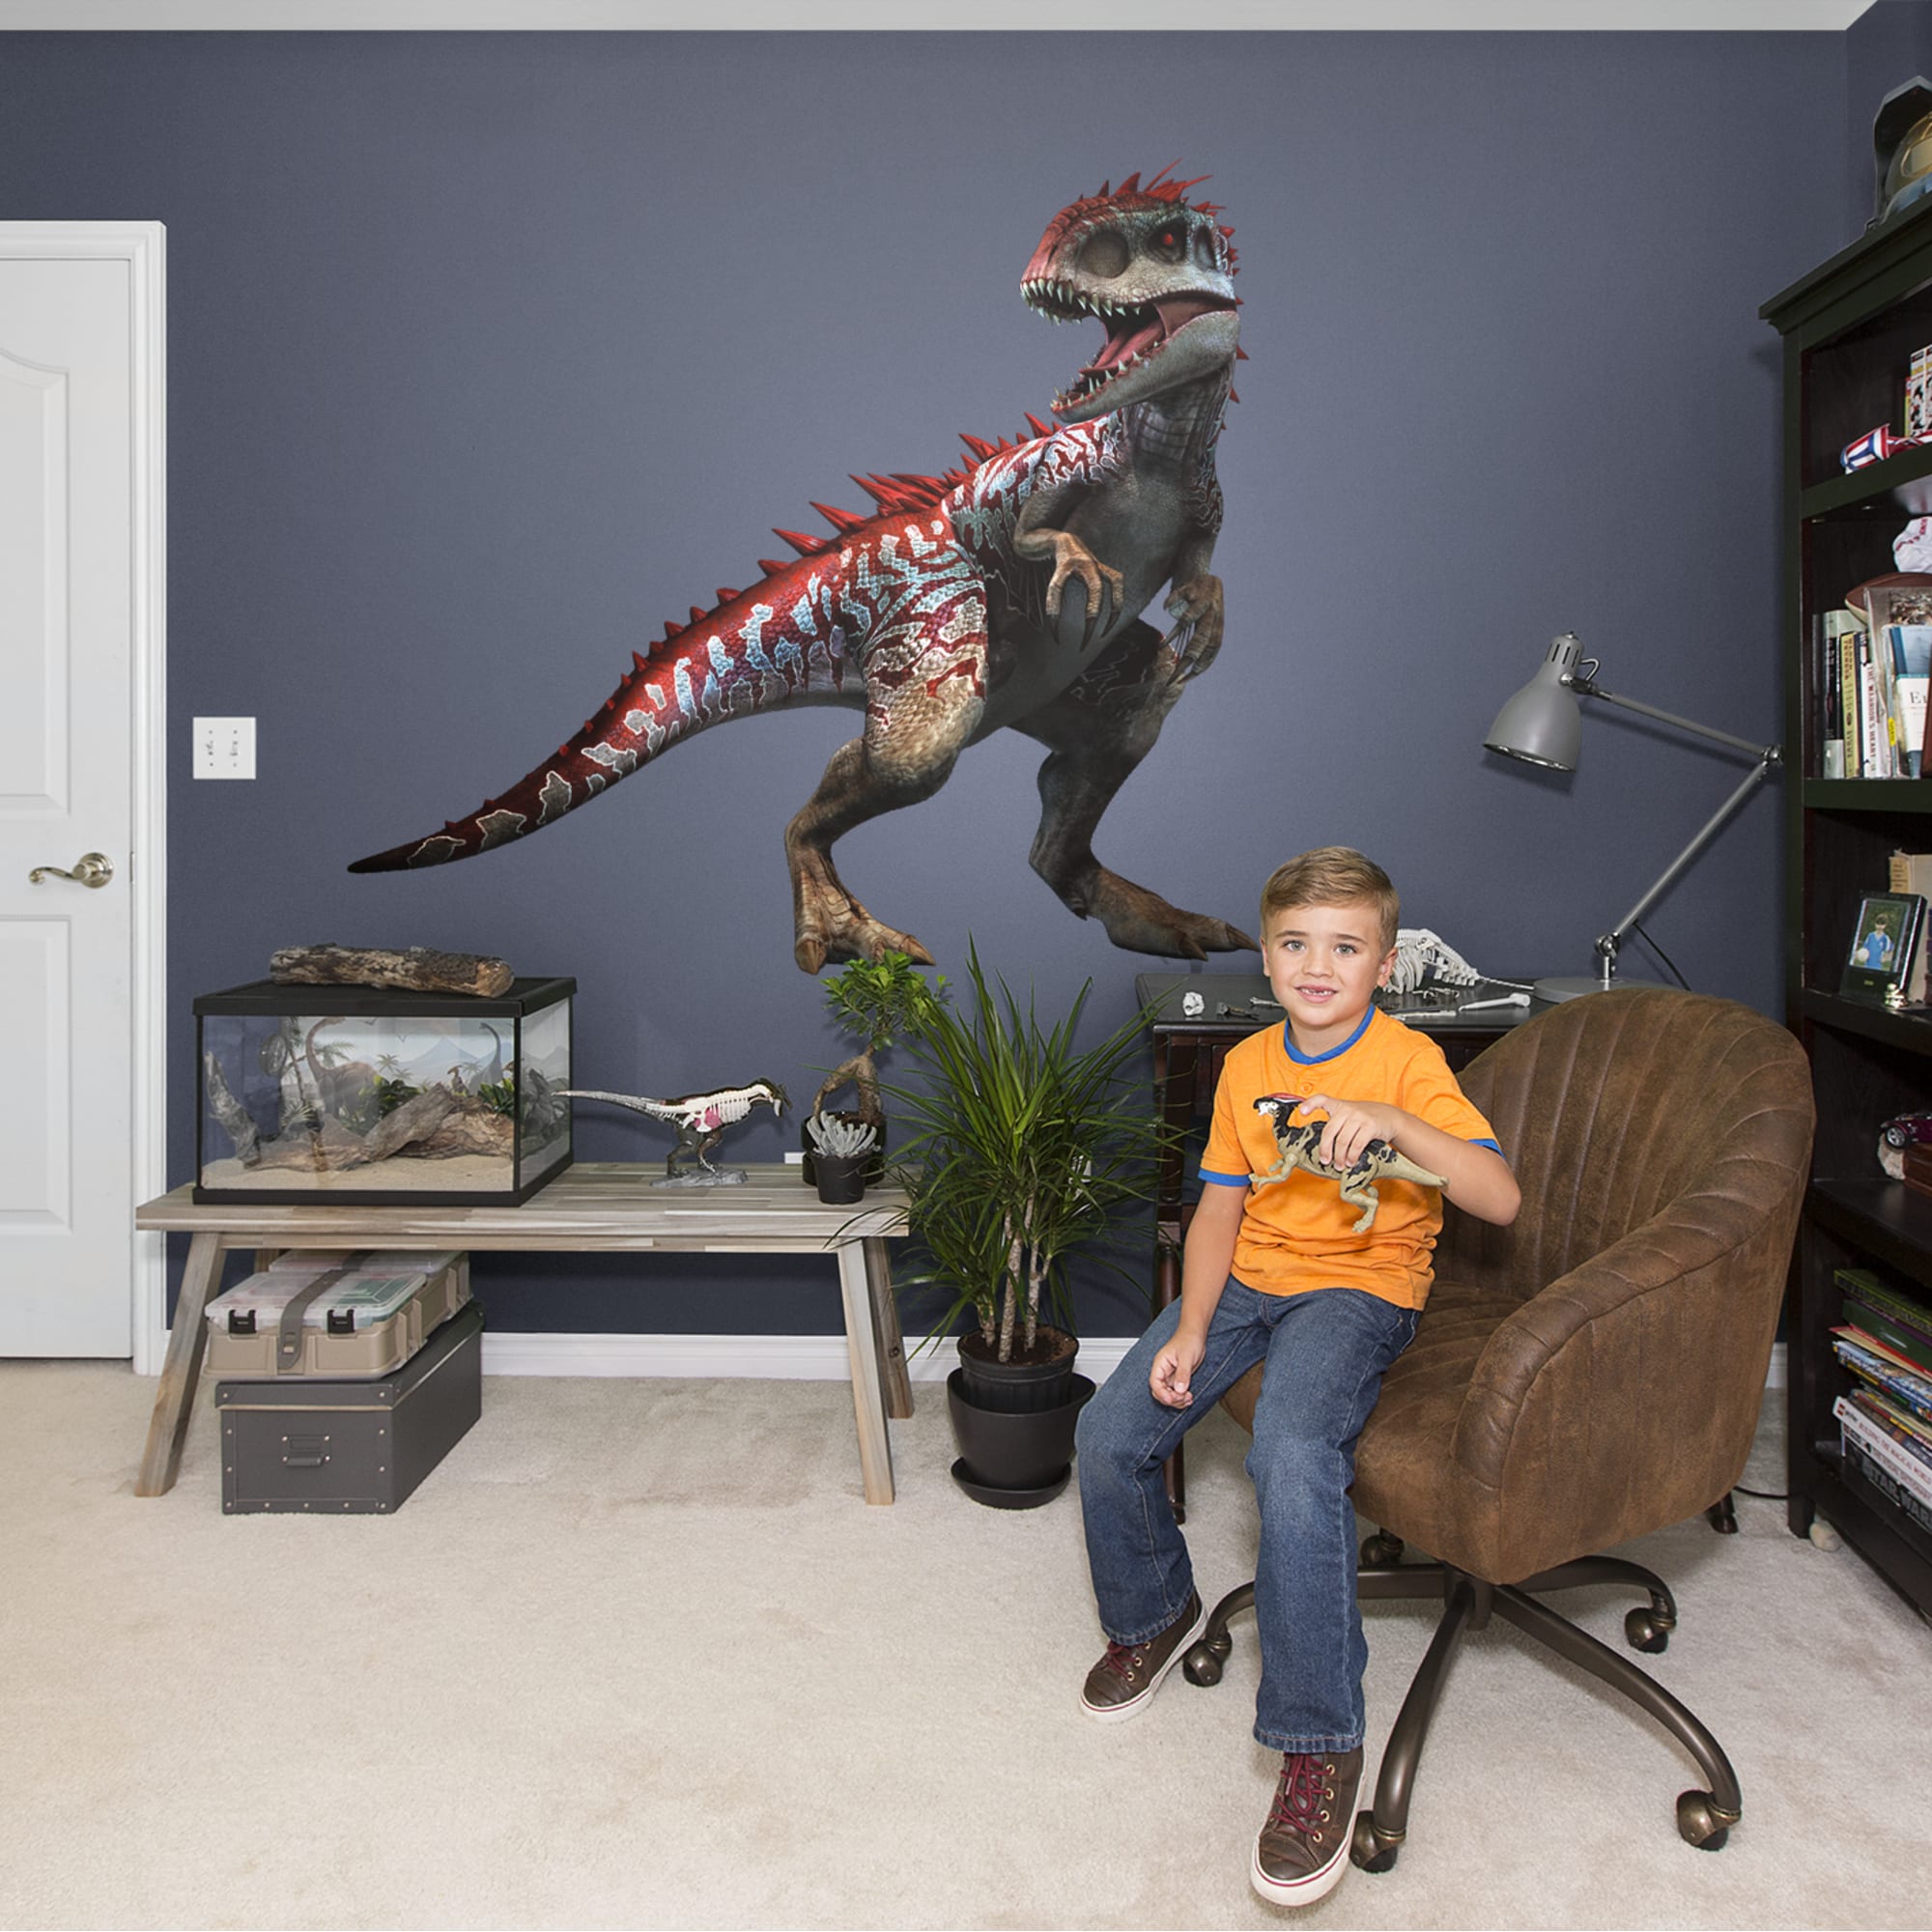 Indominus Rex Hybrid: Jurassic World - Officially Licensed Removable Wall Decal 64.0"W x 58.0"H by Fathead | Vinyl